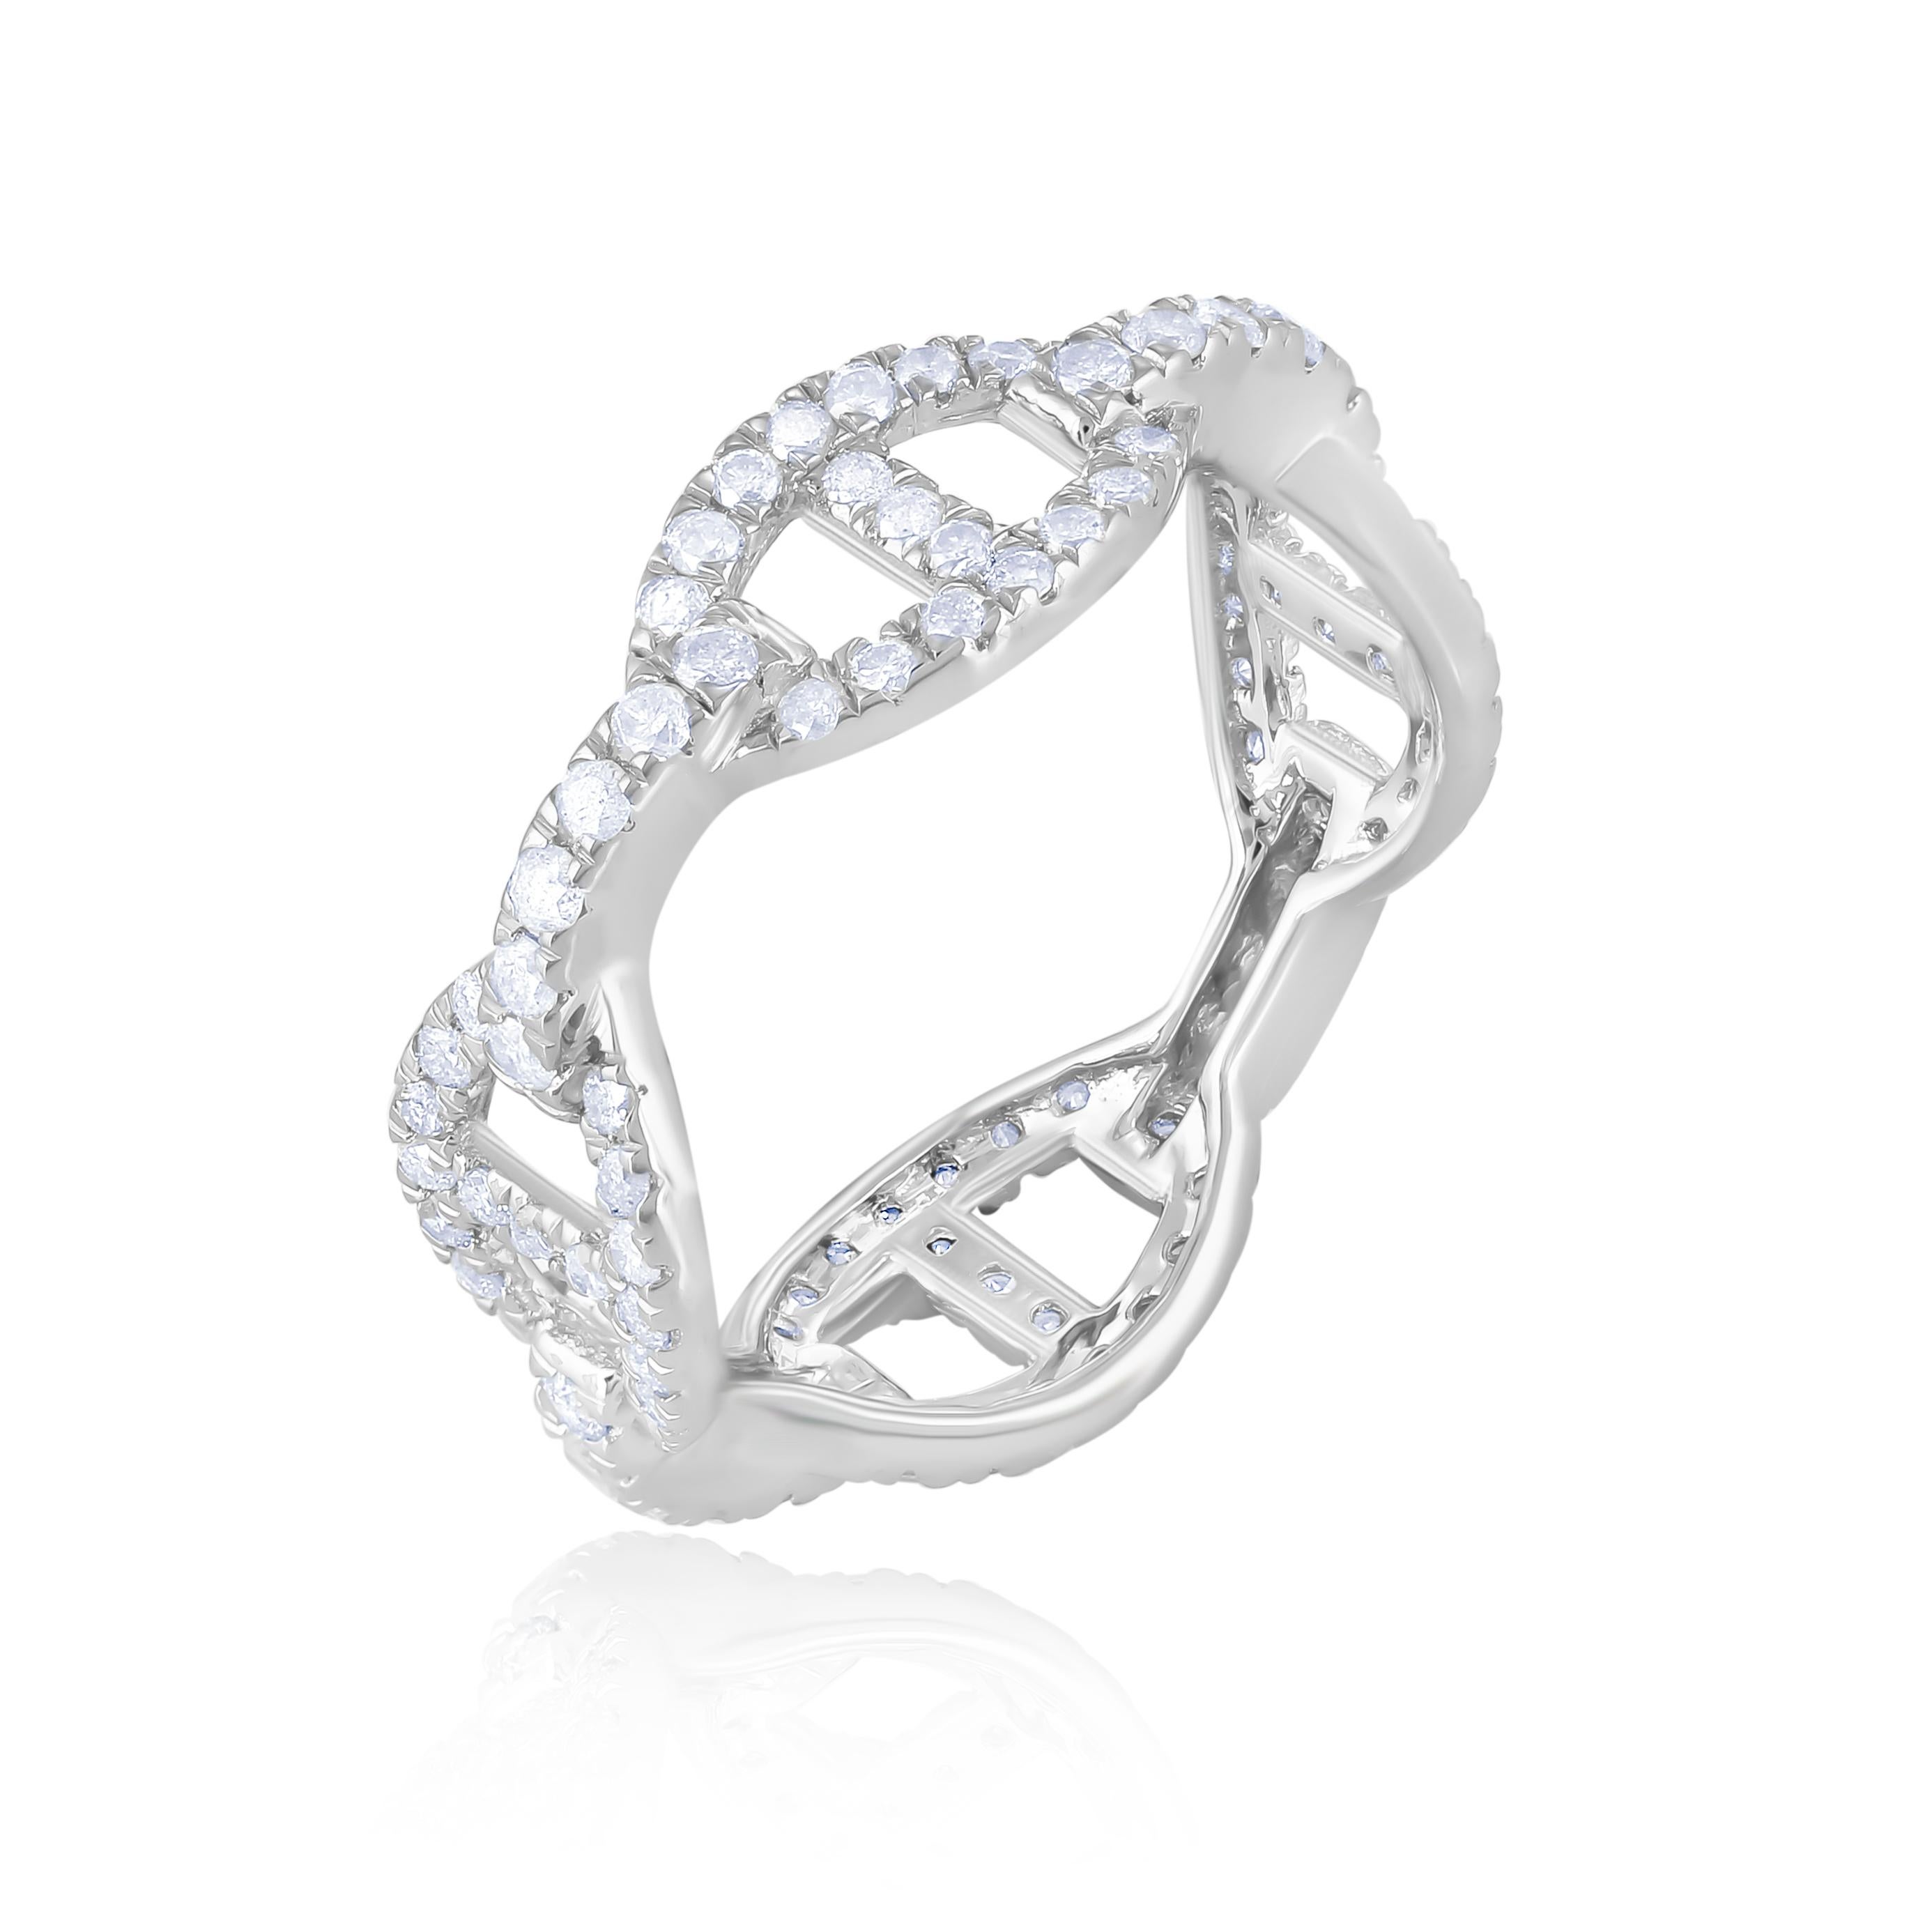 Round Cut Gemistry 0.98 Carat. T.W. Diamond Eternity Band Ring in 925 Sterling Silver For Sale